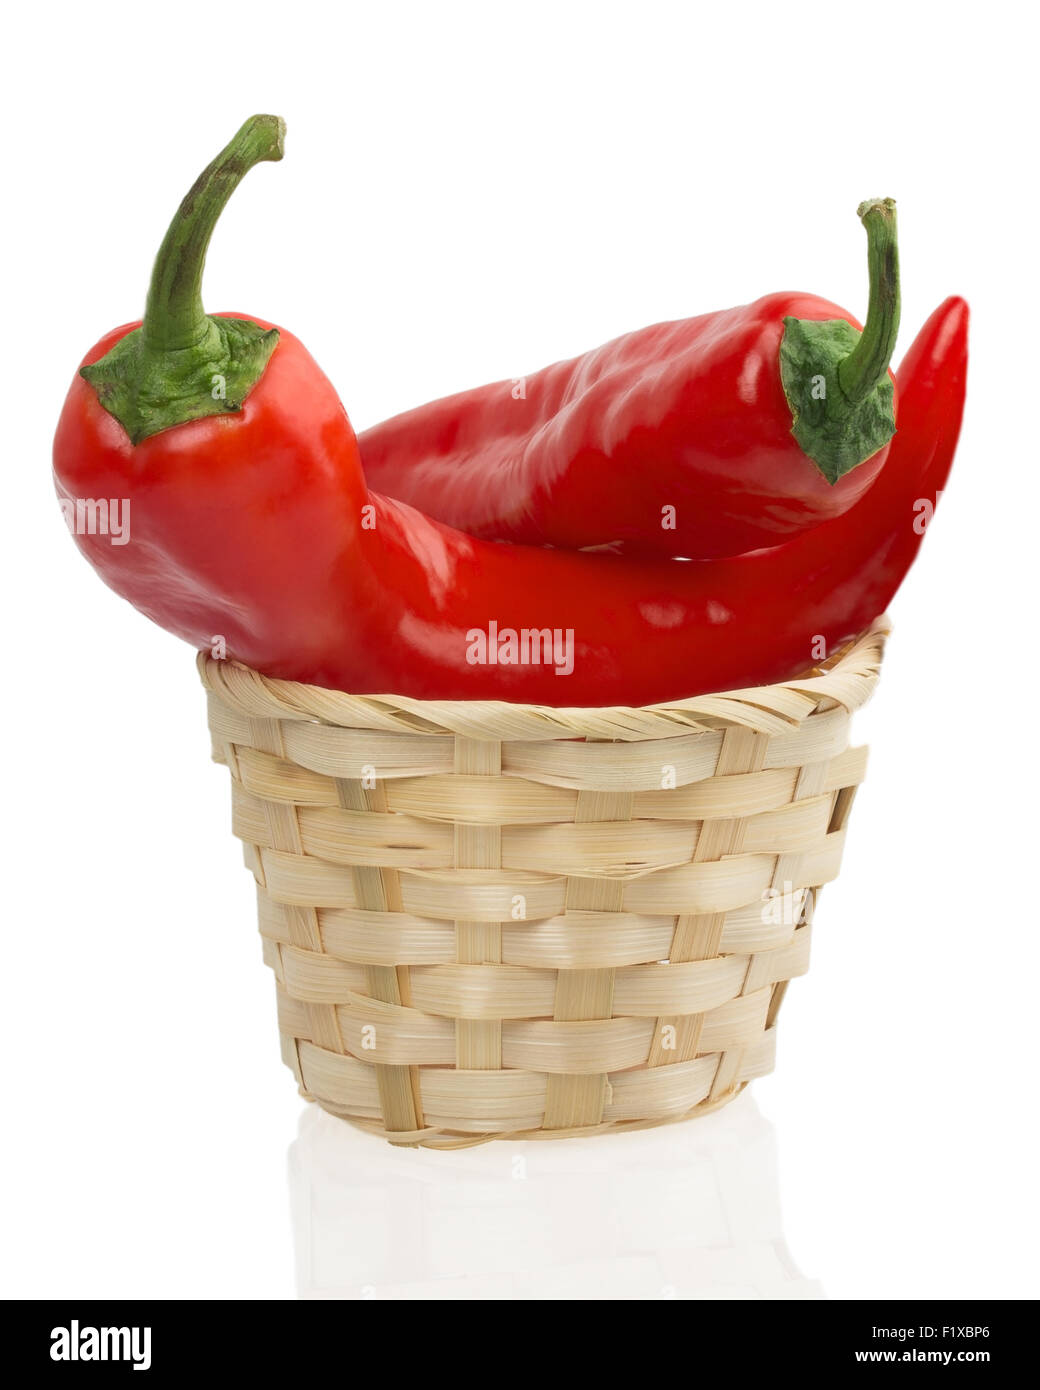 red chilly  on a white background. Stock Photo